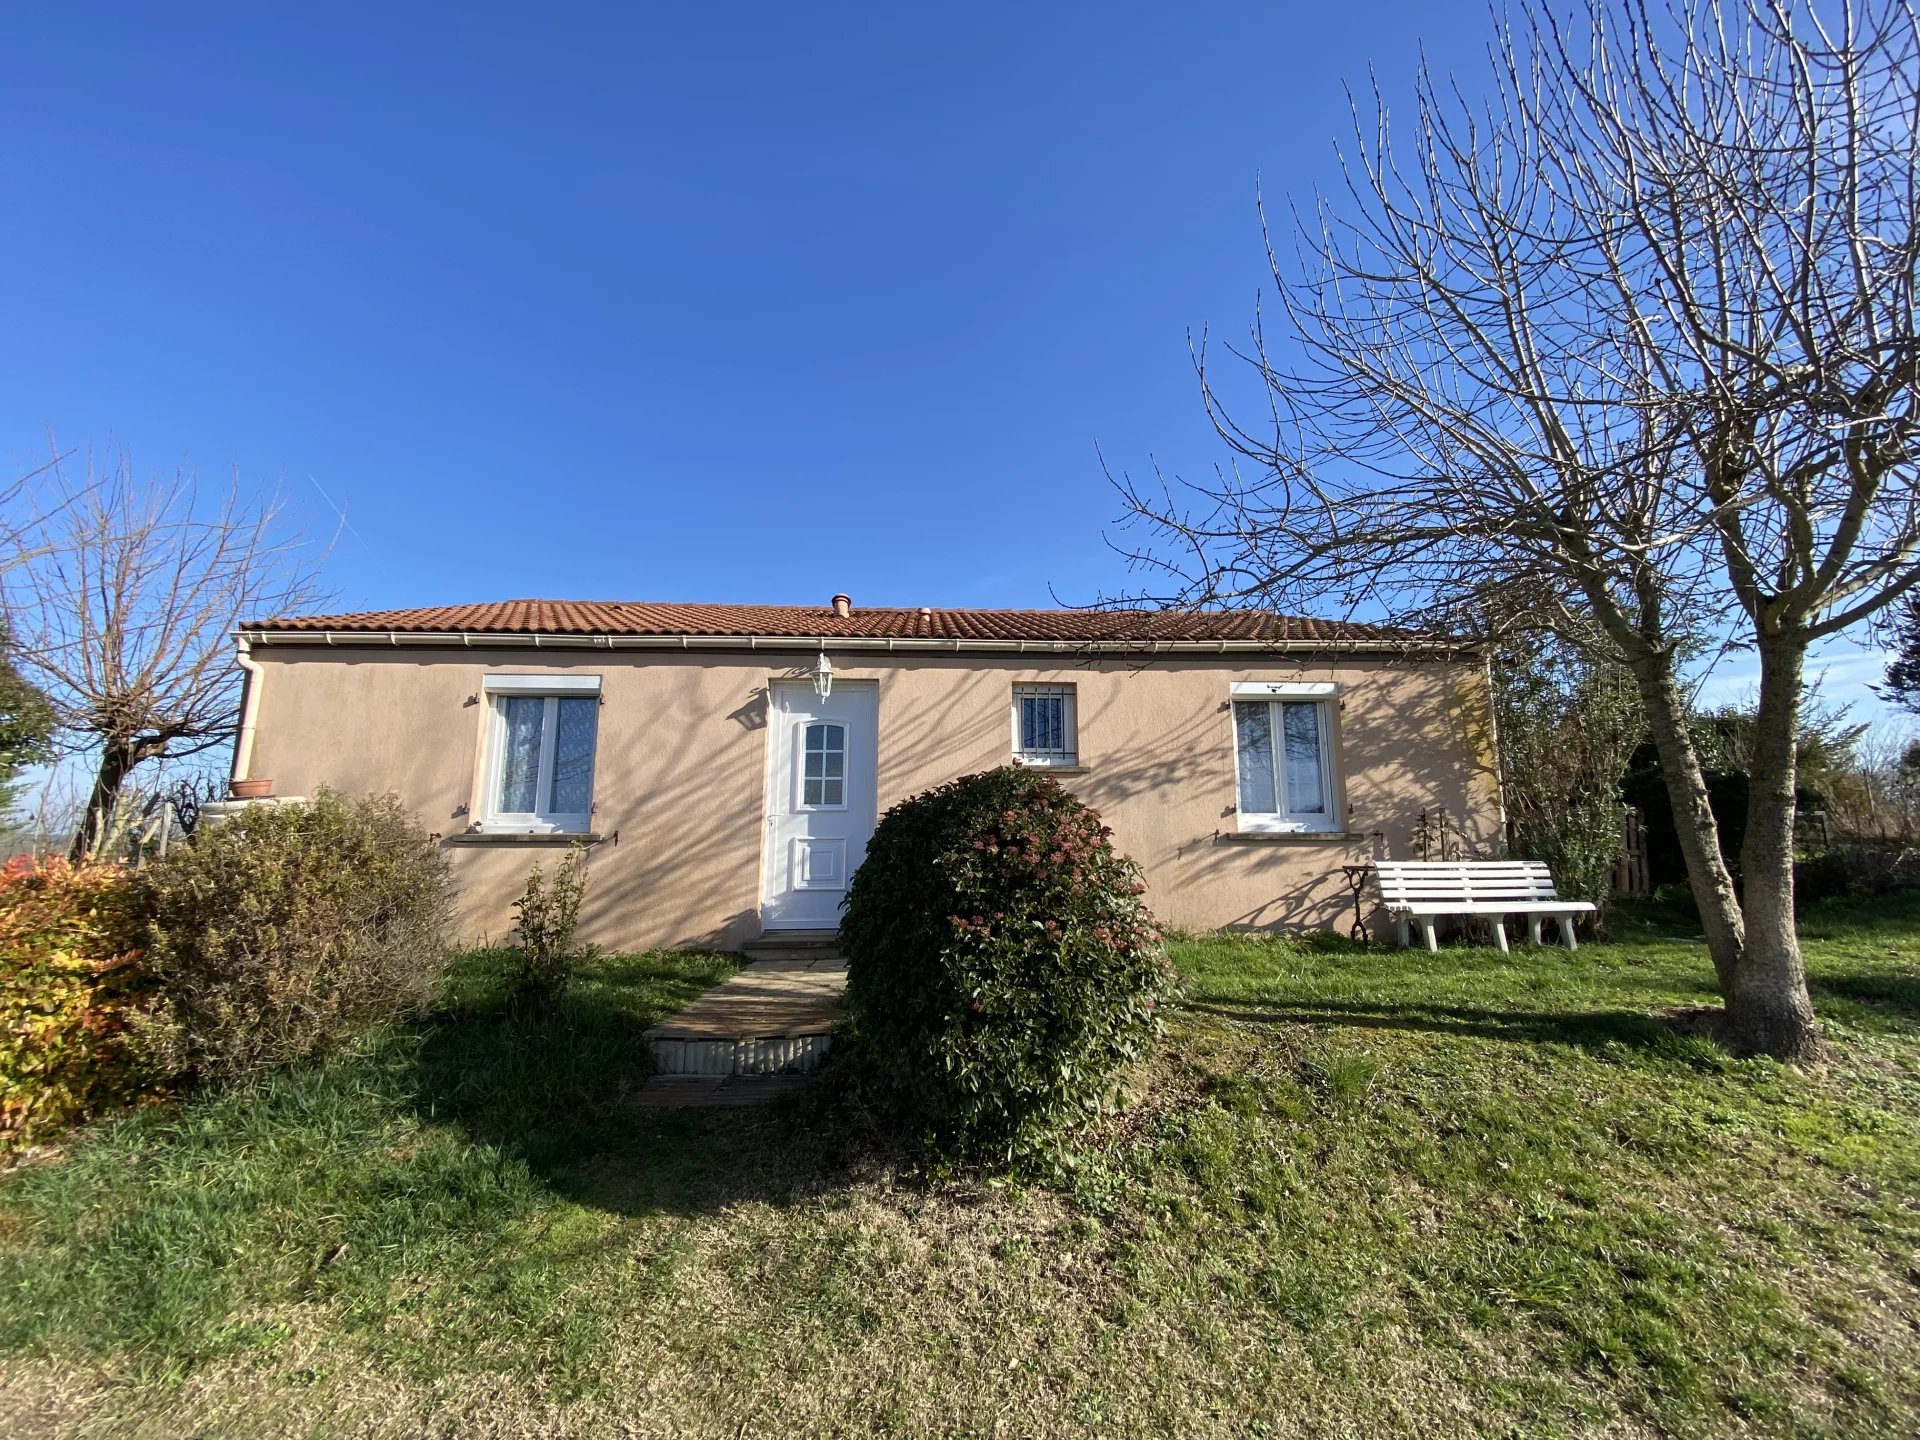 Near. Aurignac, pretty detached house 84m² on 5011m² of land, lovely view of the Pyrenees